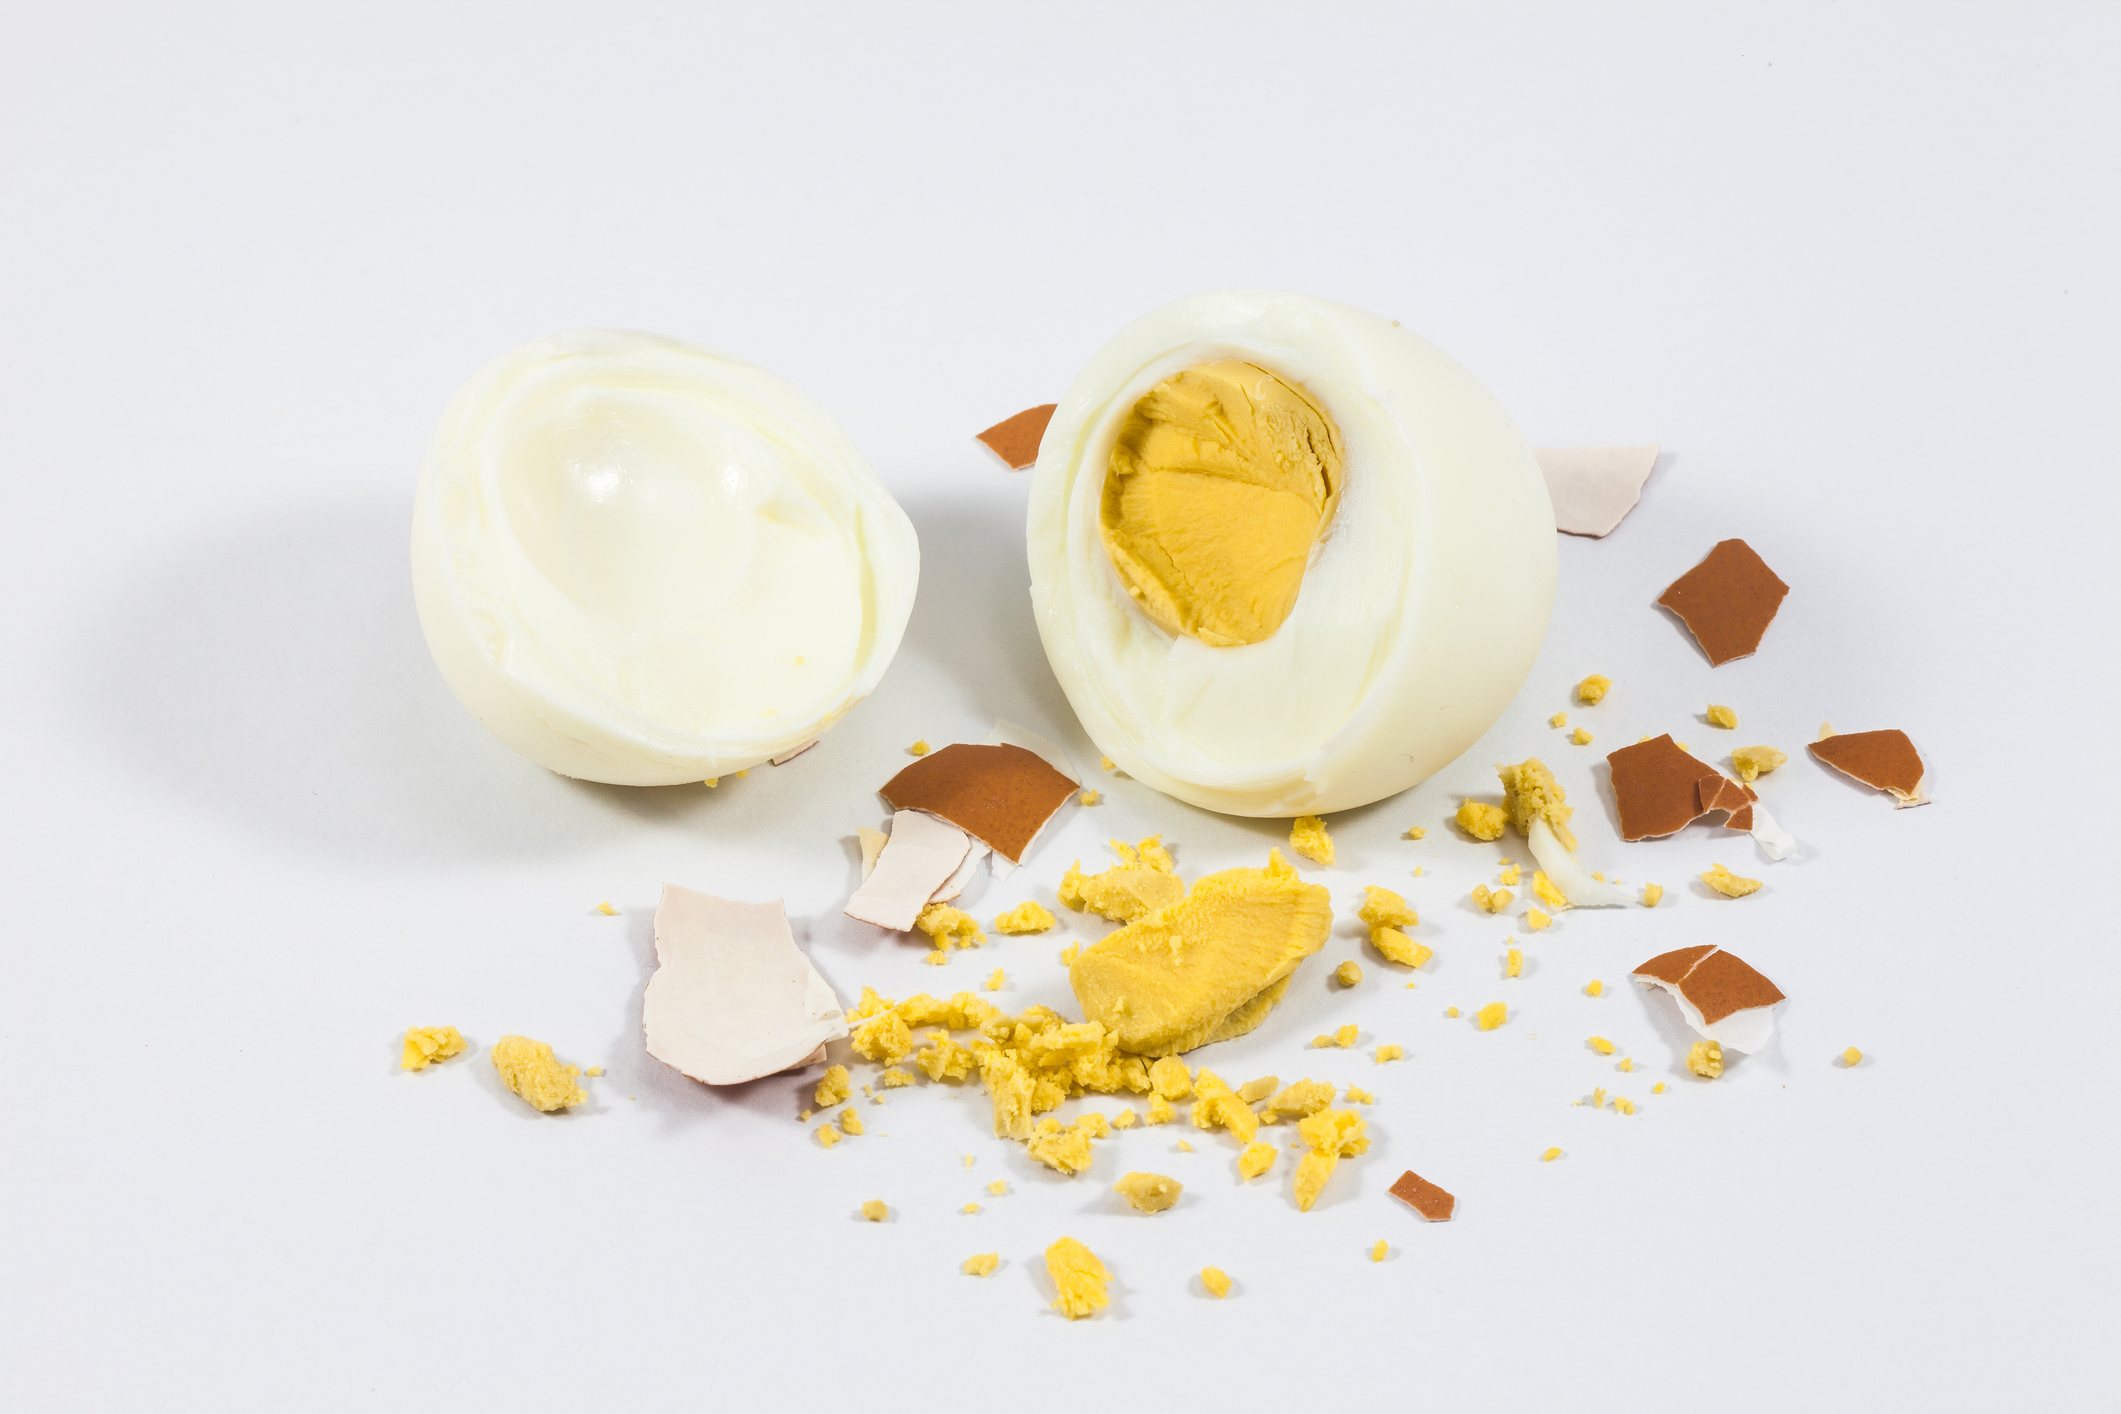 Hard-Boiled Eggs Can Explode Violently If Microwaved